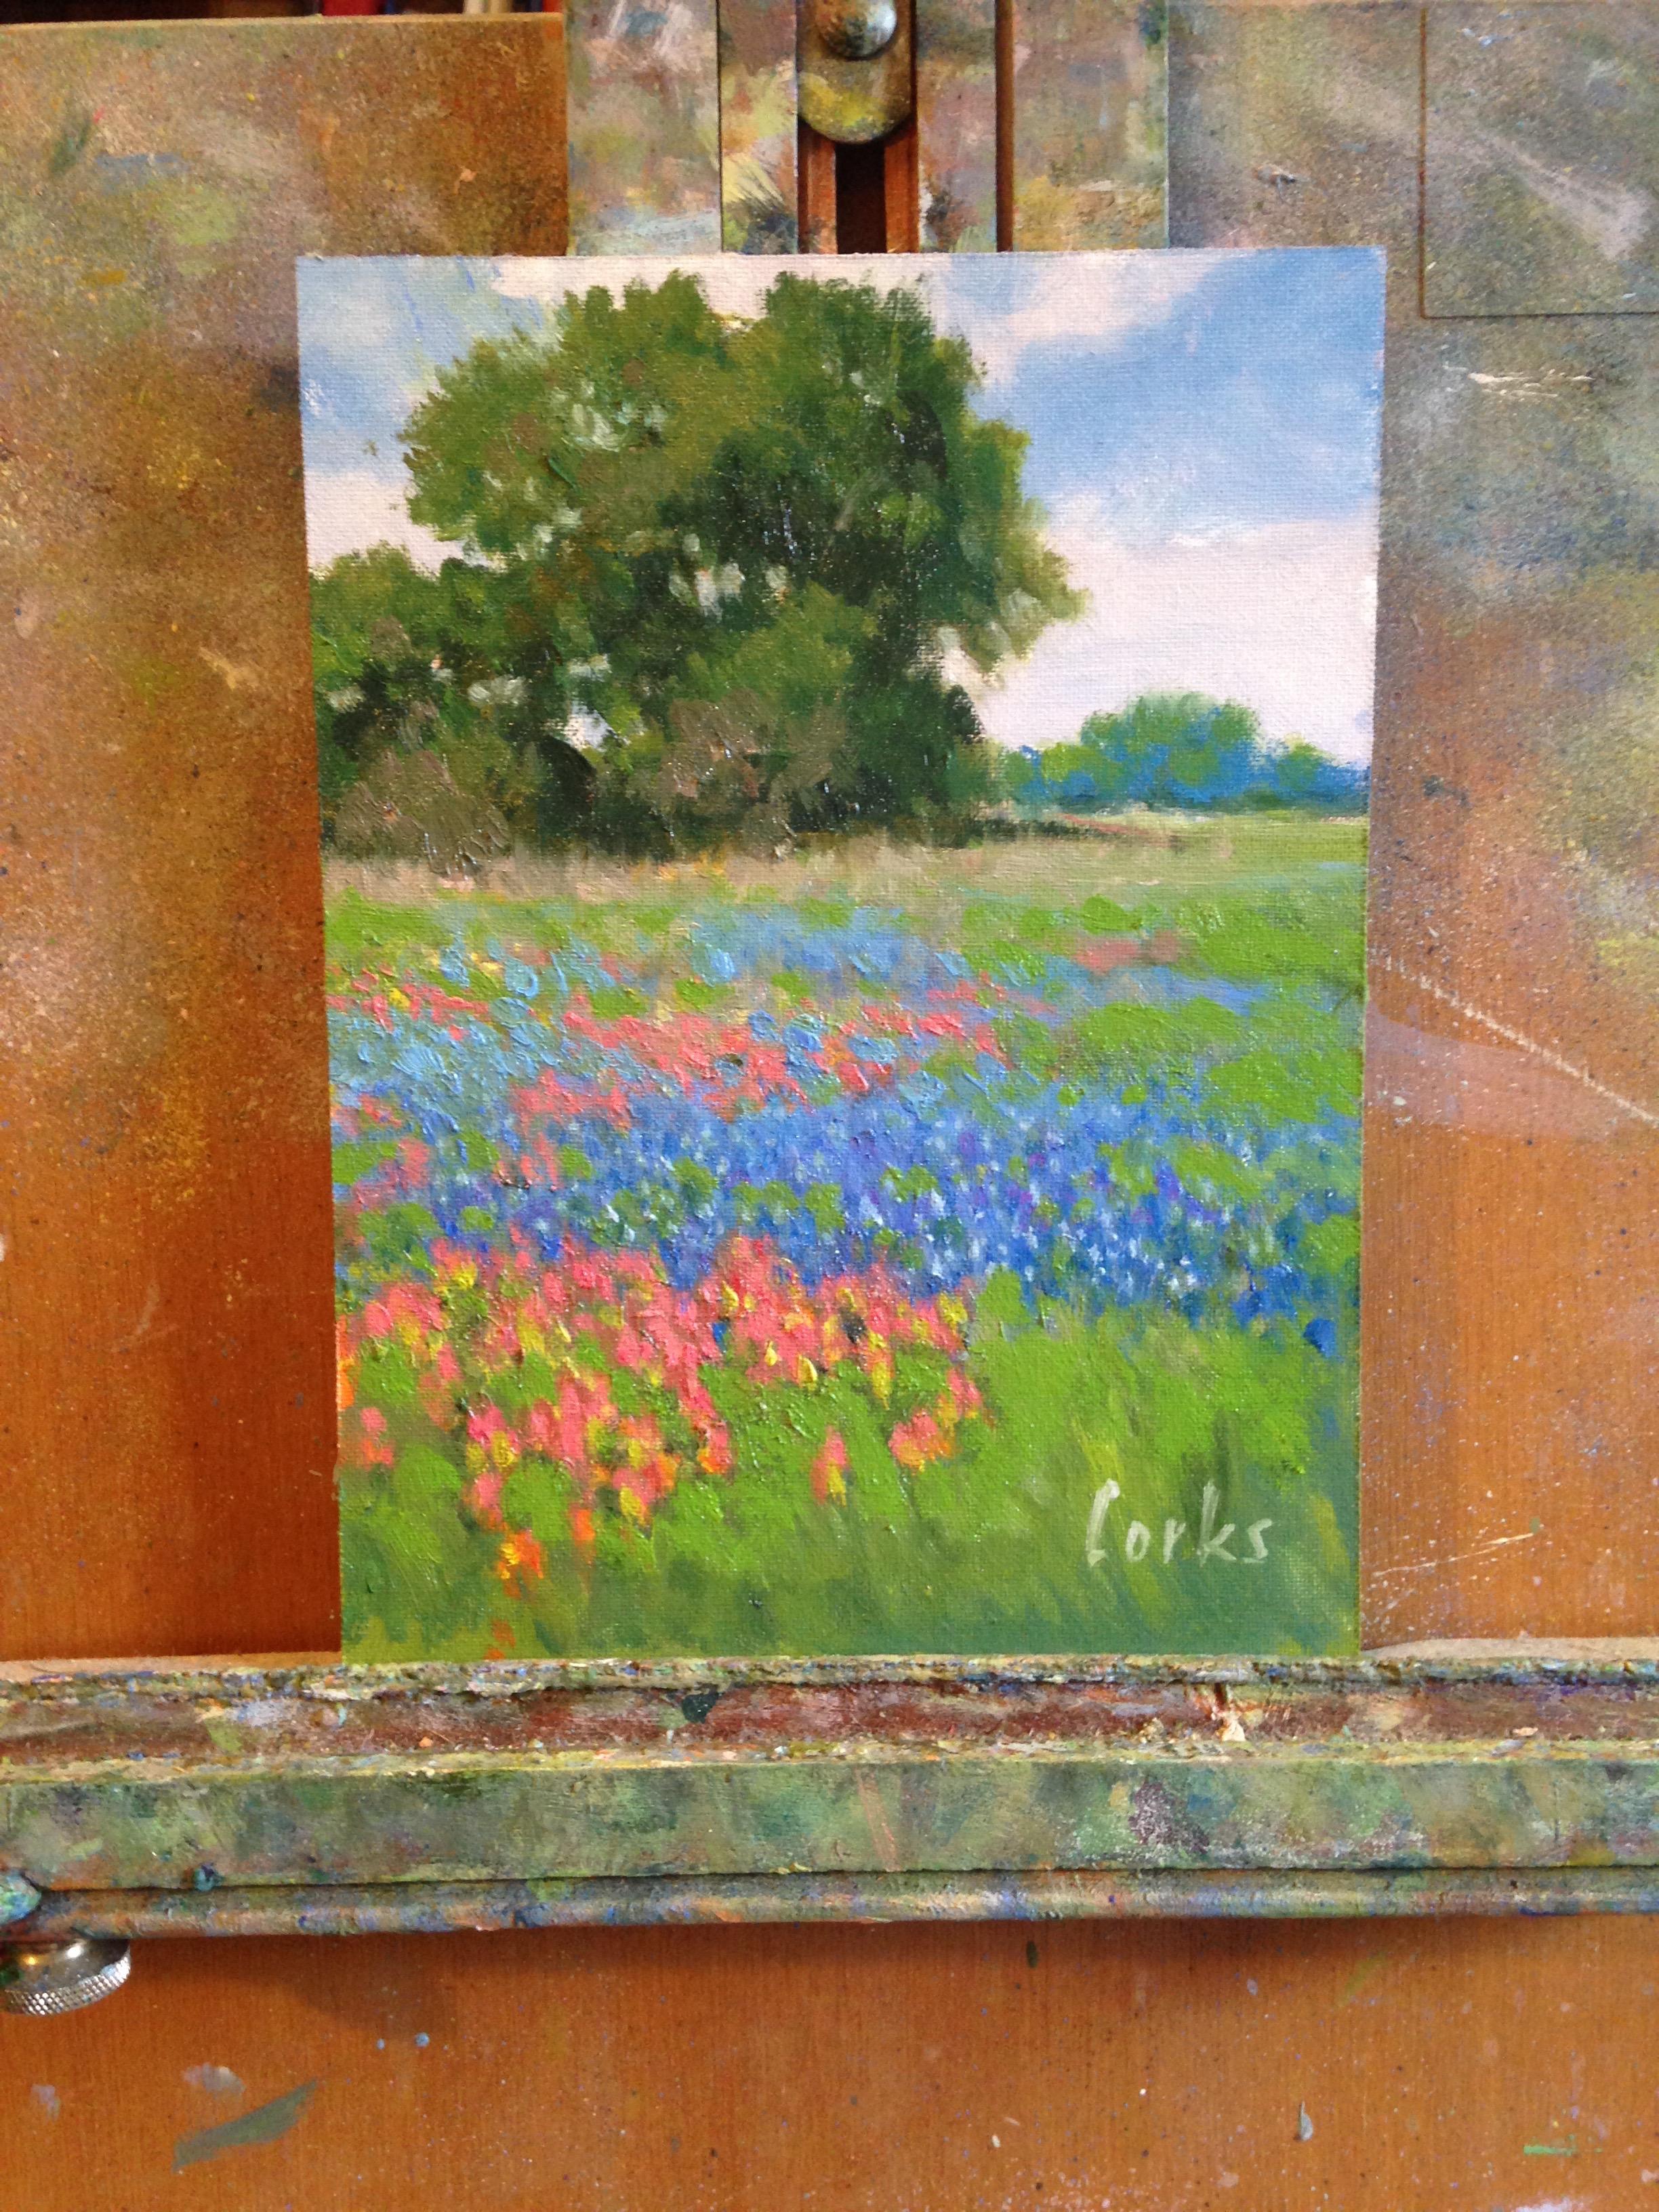 Bluebonnets and Paintbrush - Abstract Impressionist Art by David Forks